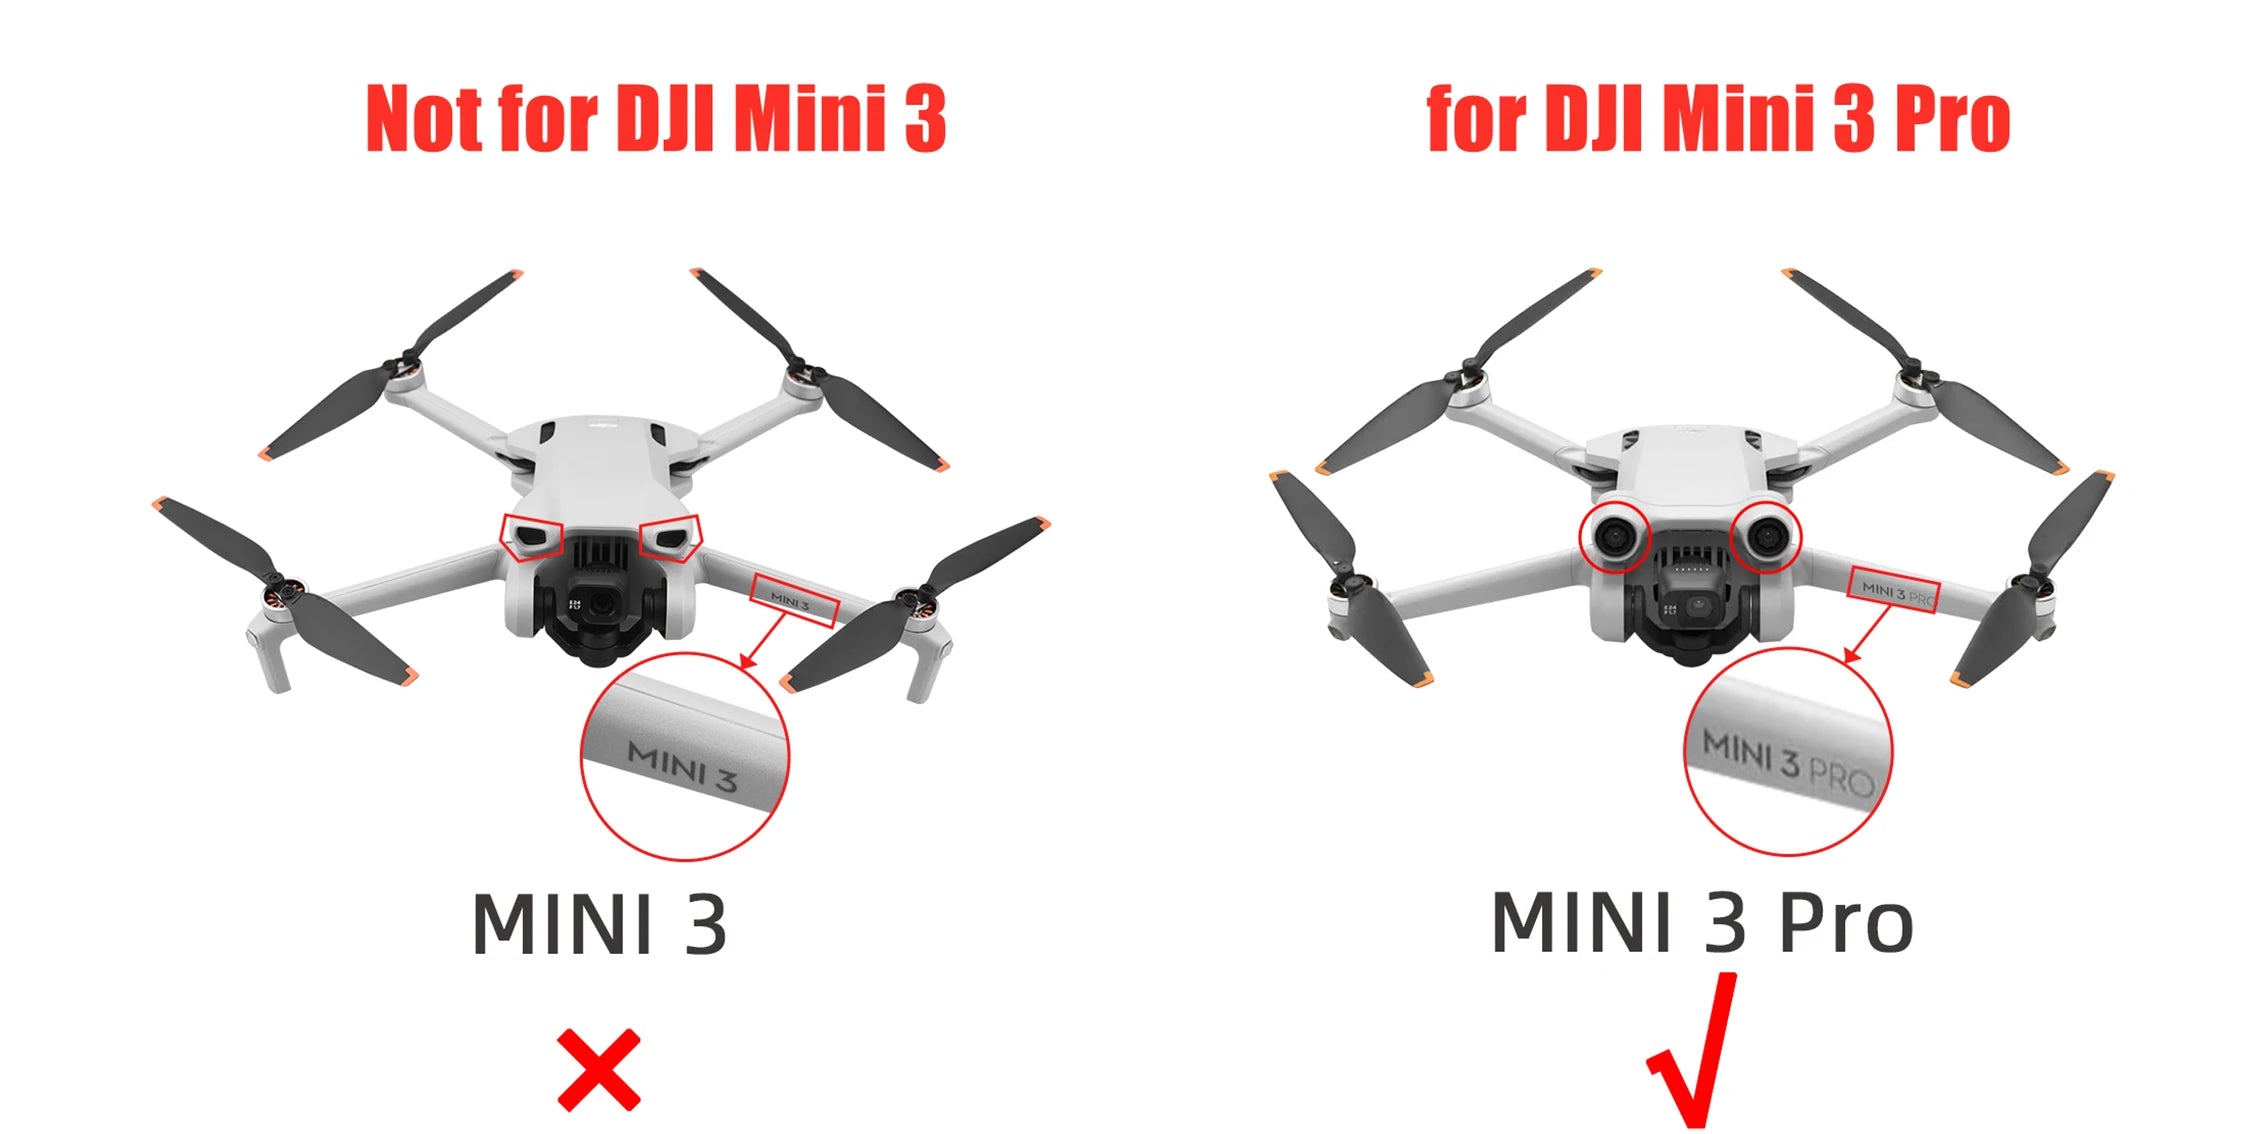 Specially designed for Mini 3 Pro, these compact propellers provide quieter flight .